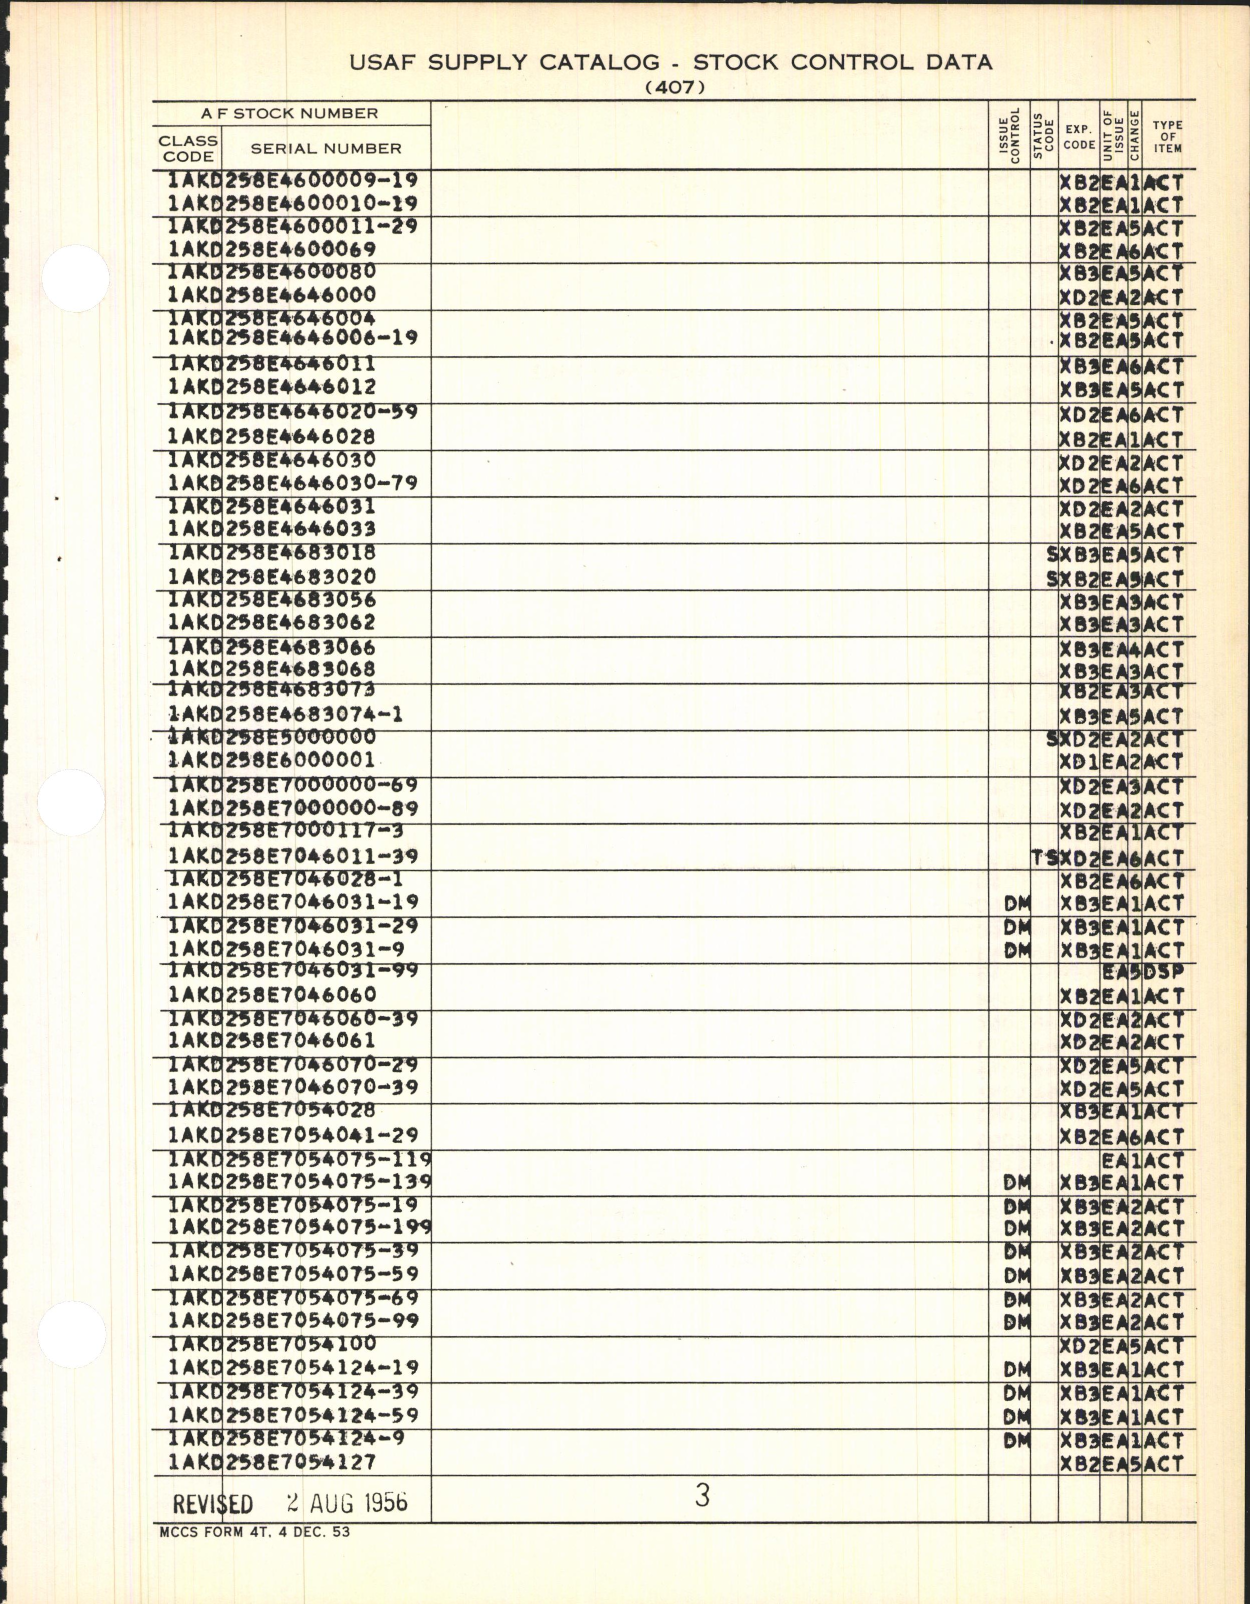 Sample page 5 from AirCorps Library document: Supply Catalog Parts for Martin TM-61 Guided Missile